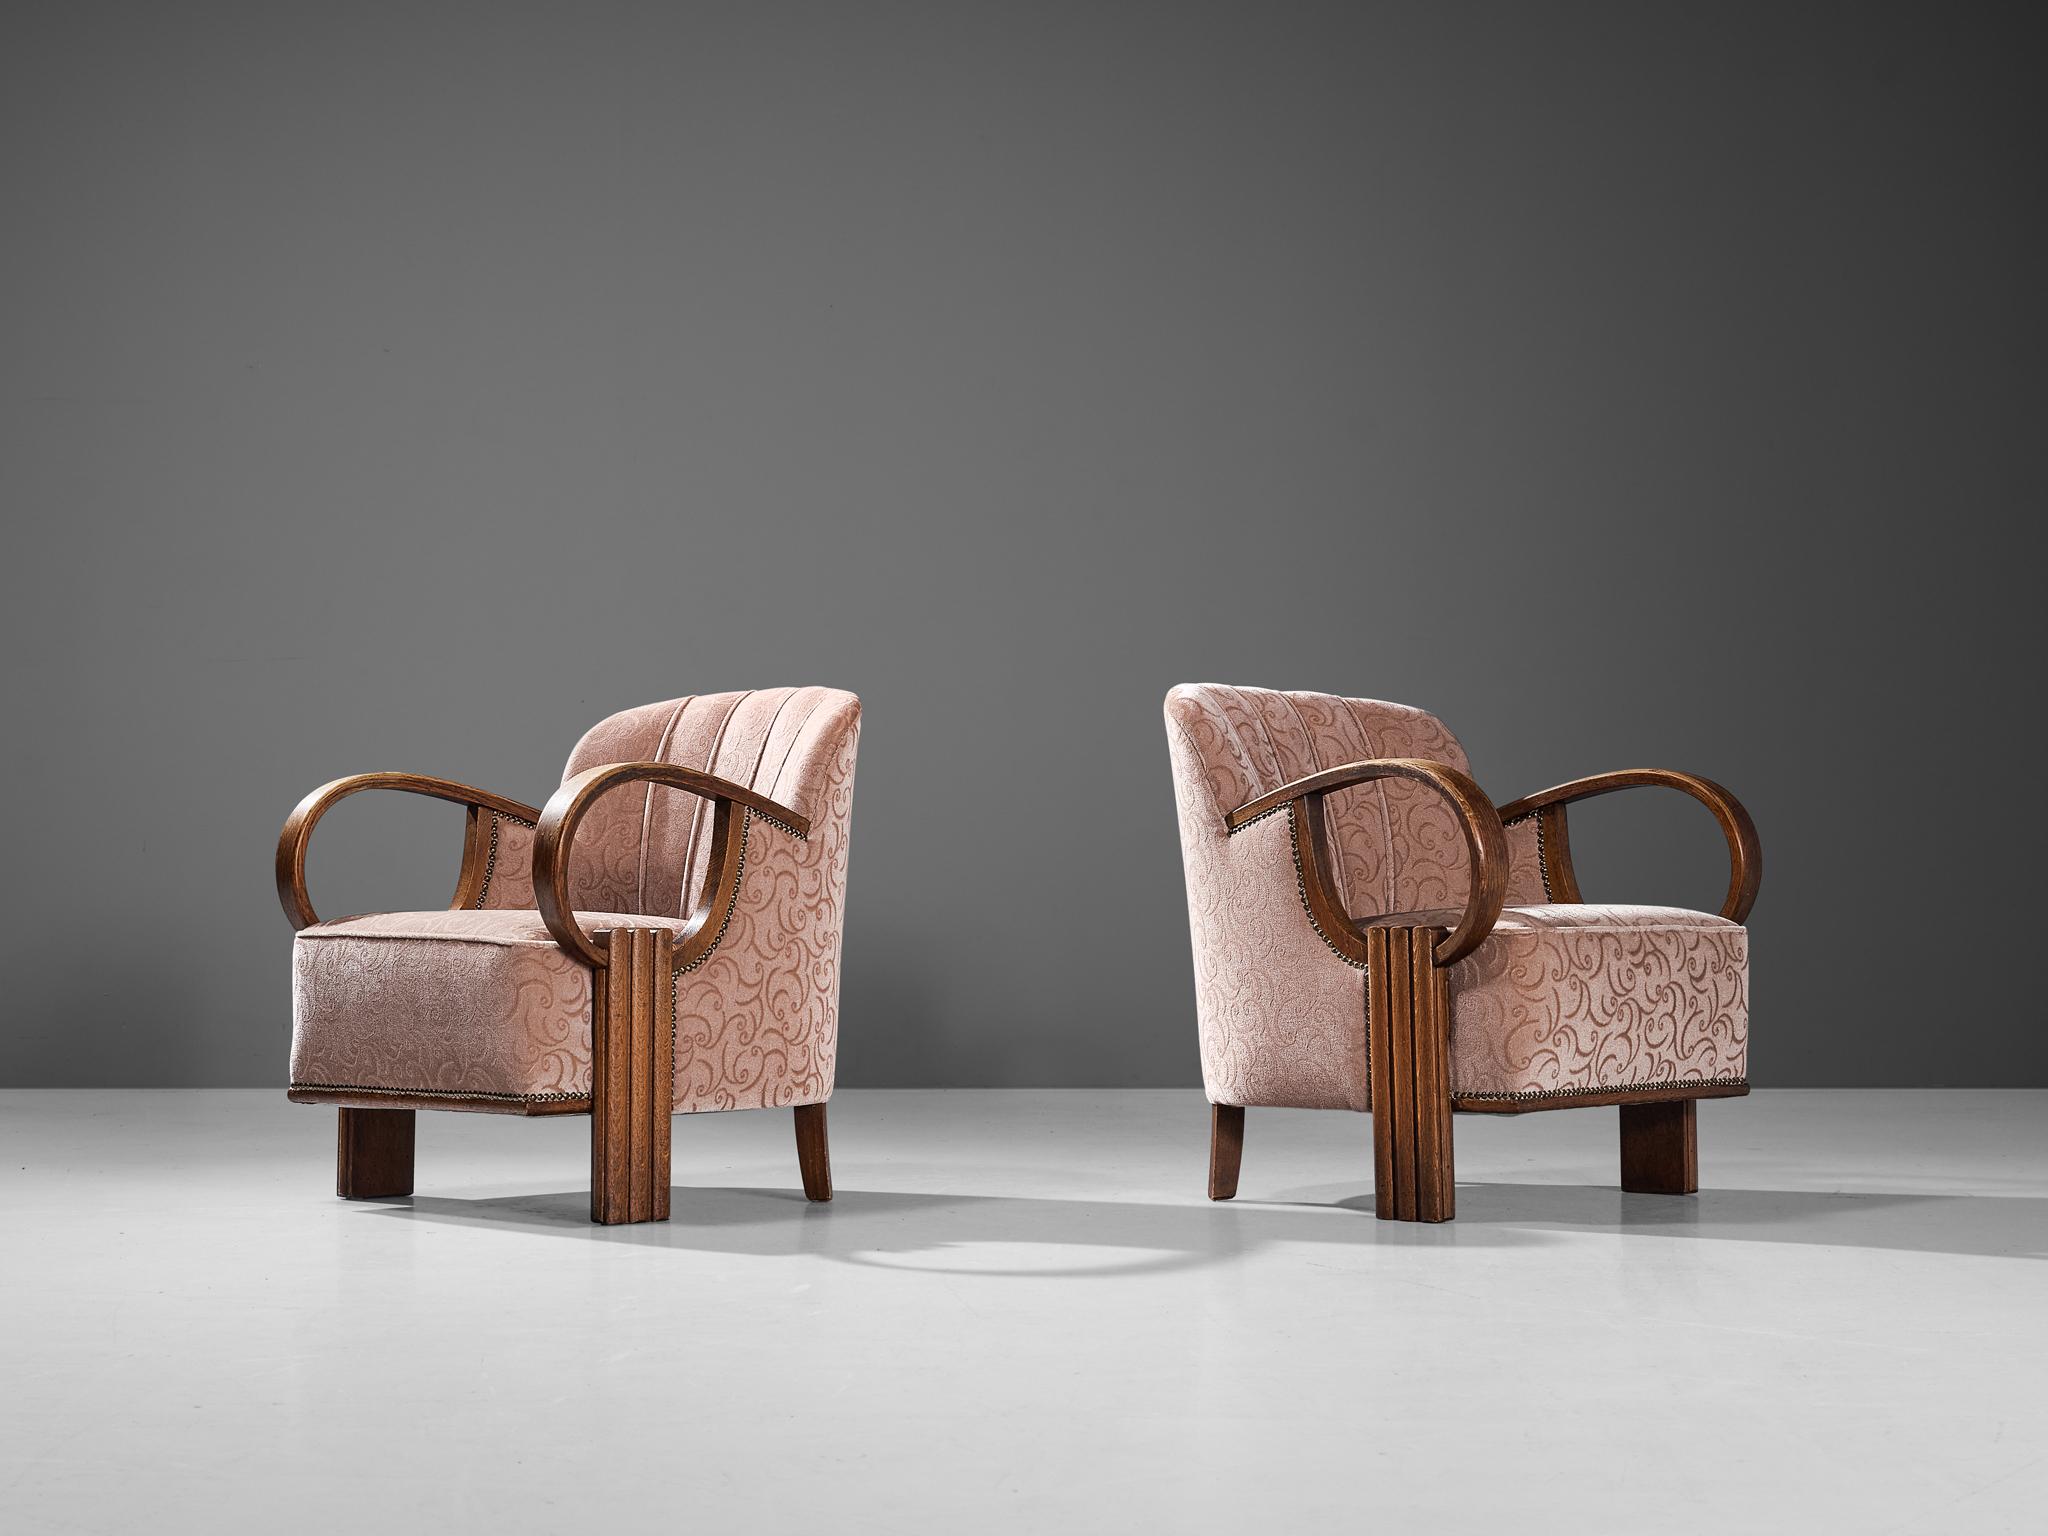 Pair of lounge chairs, oak, velvet, metal, France, 1930s

This charming pair of French lounge chairs are created in one of the most influential periods for the arts namely the Art Deco Movement. The armrests are curved in a hemispherical shape